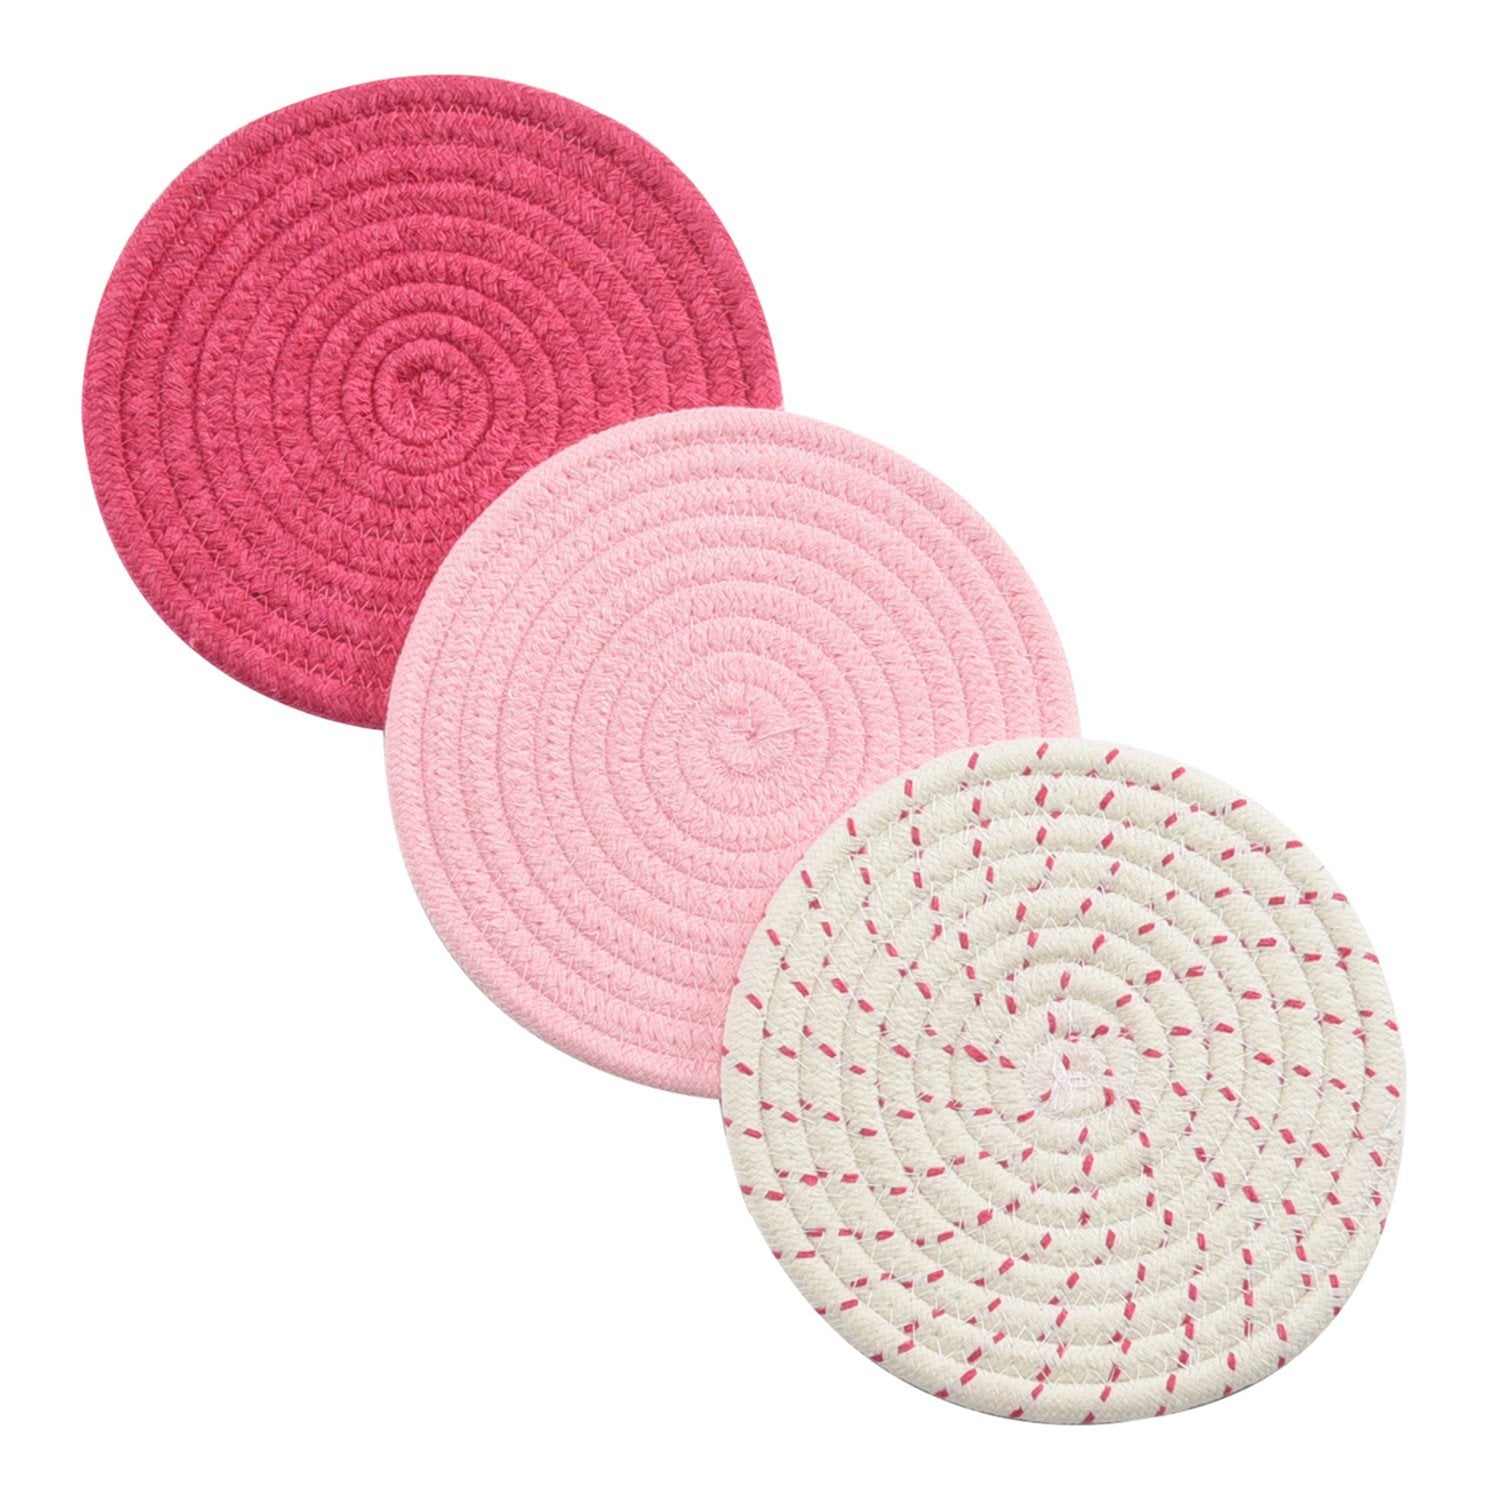 Kitchen Potholders Set Trivets Set 100% Pure Cotton Thread Weave Hot Pot Holders Set (Set of 3) Stylish Coasters, Hot Pads, Hot Mats, Spoon Rest For Cooking and Baking by Diameter 7 Inches (Pink)